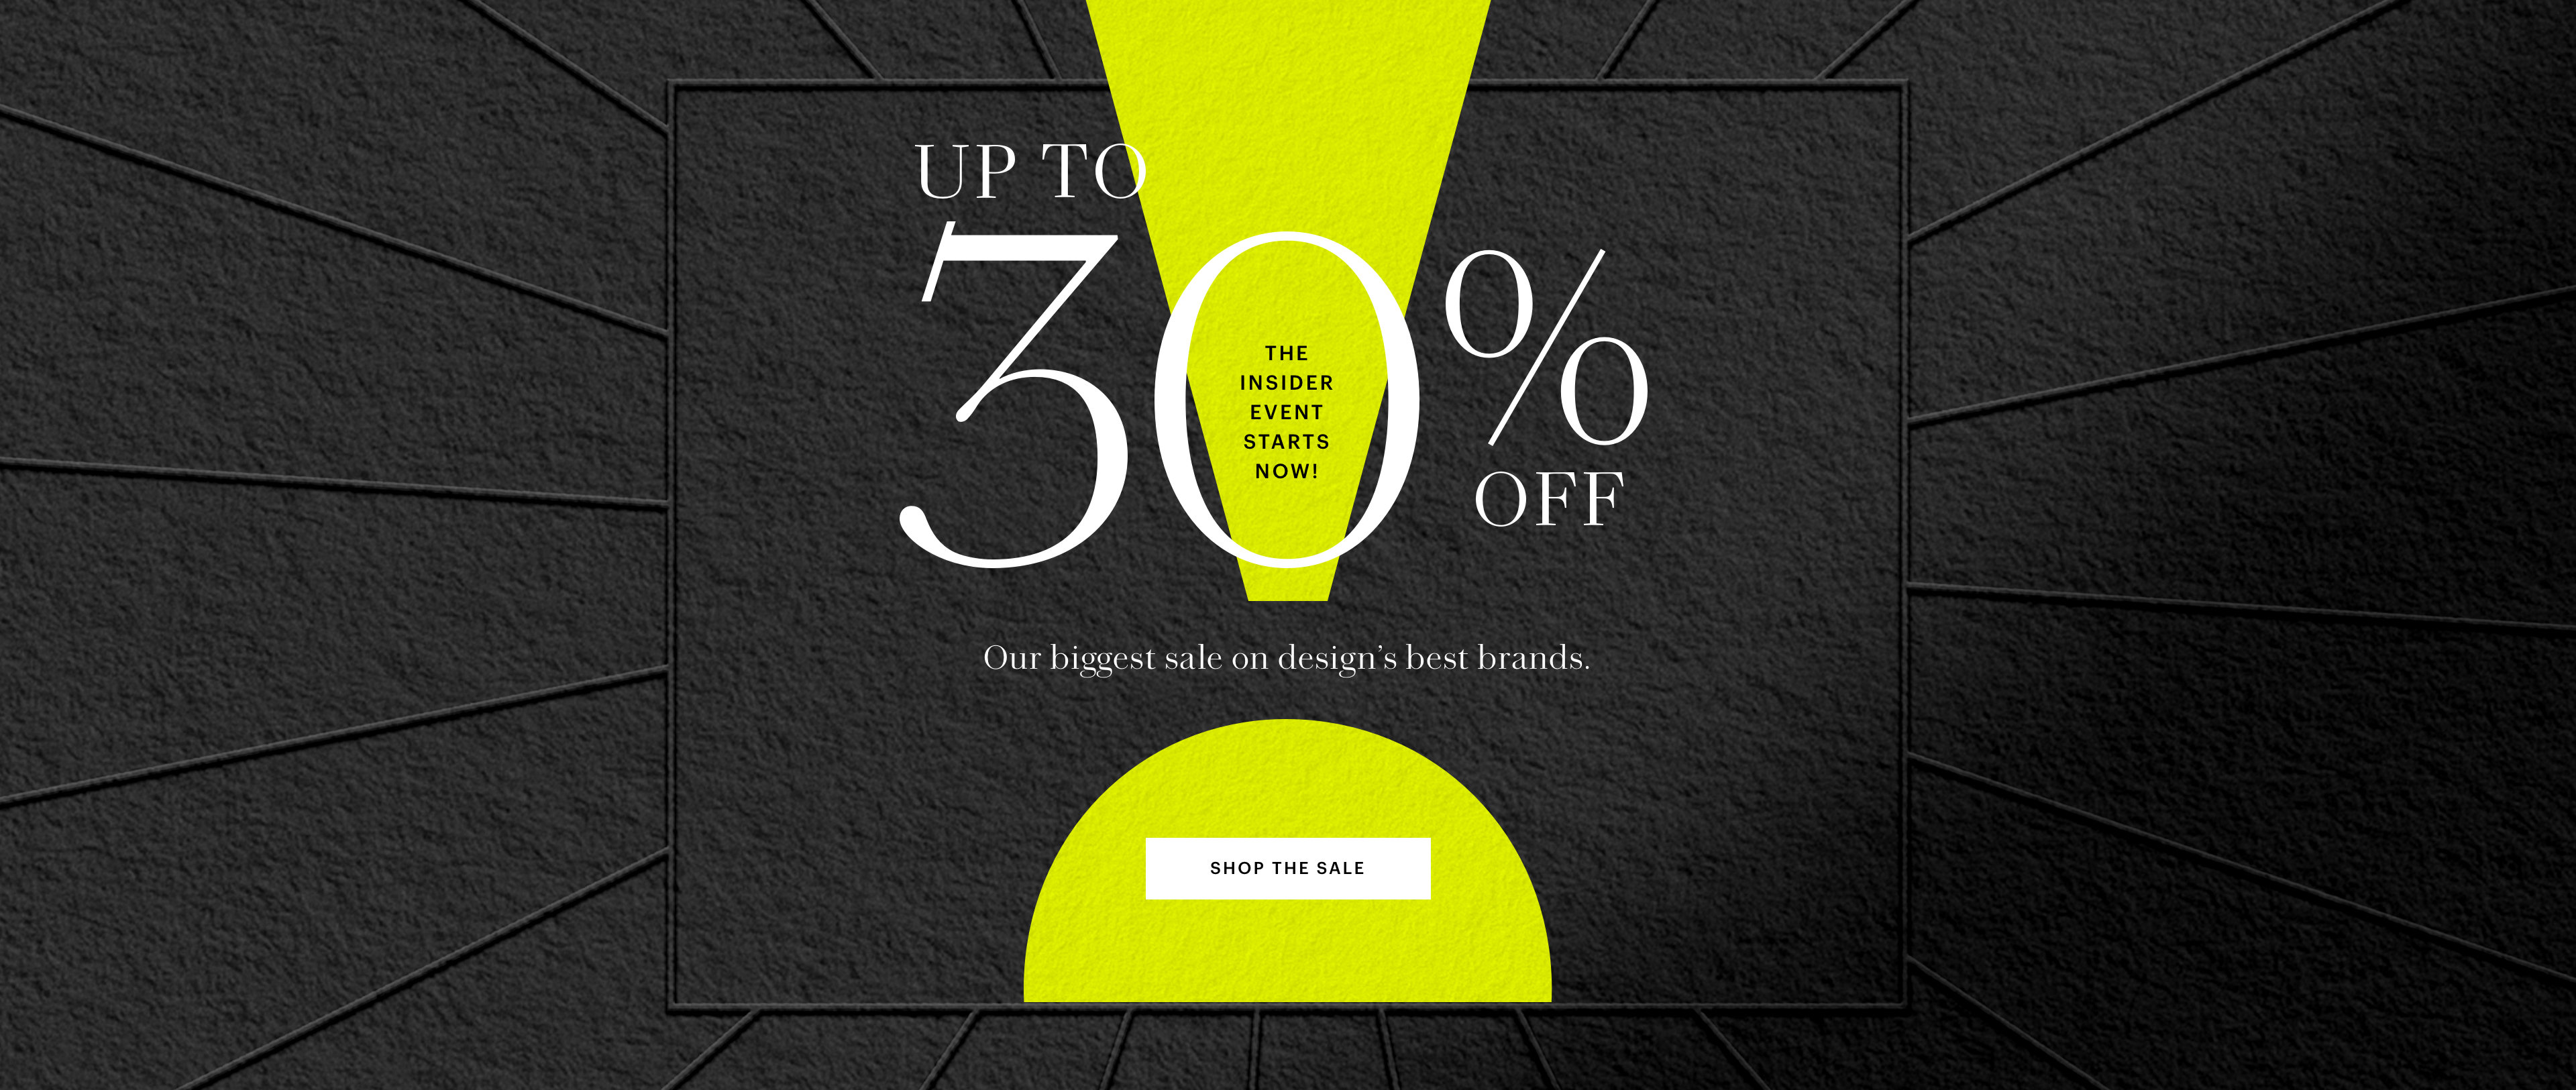 The Insider Event is back! Up to 30% off SHOP THE SALE